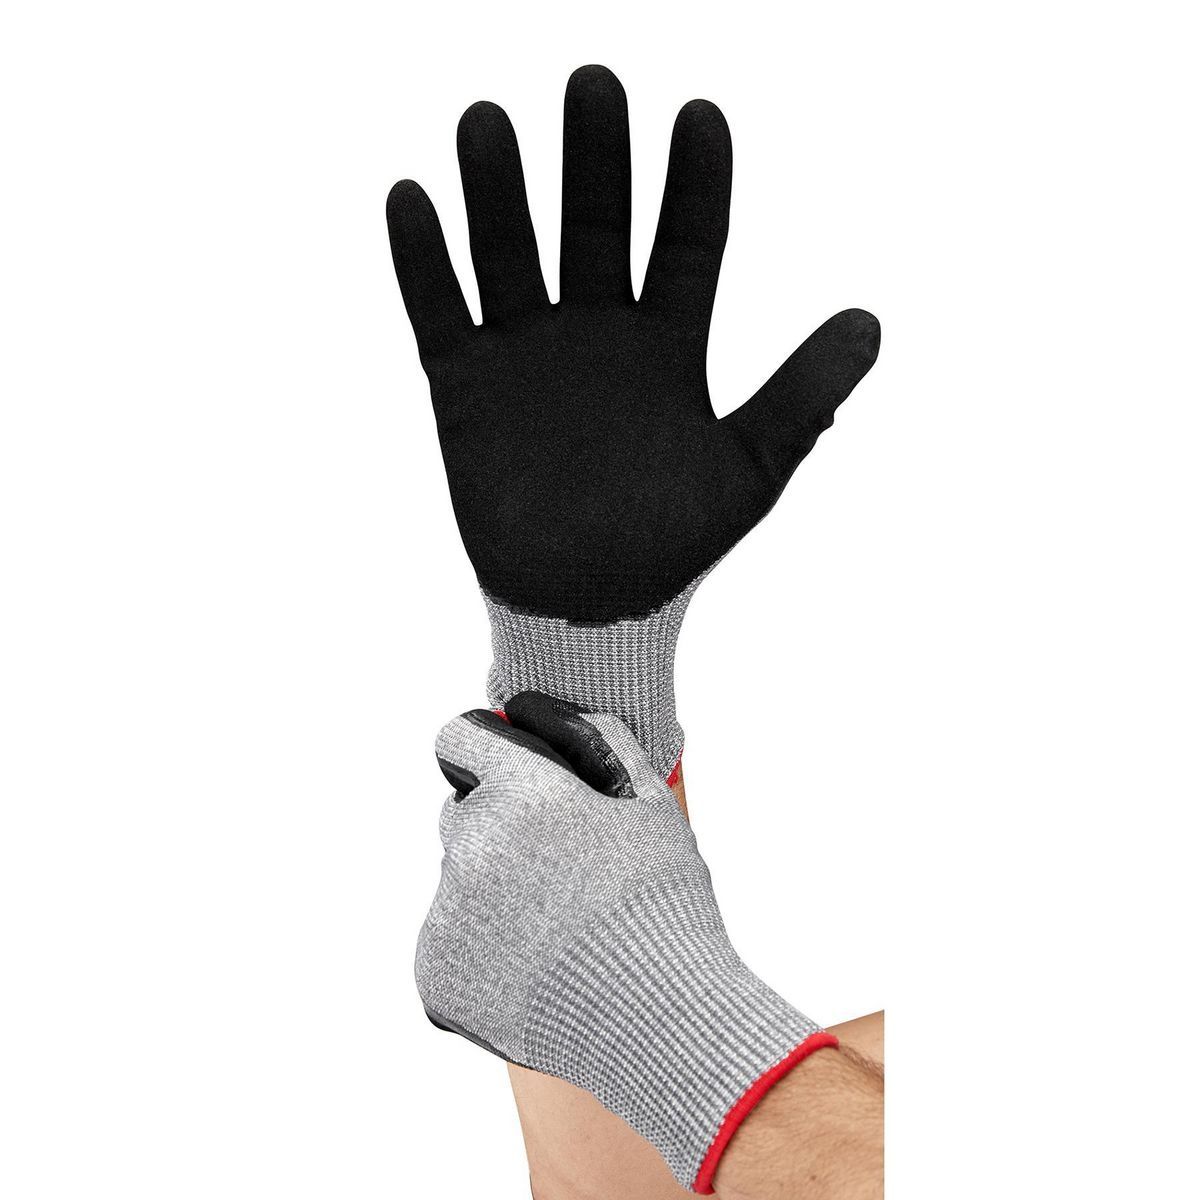 Hardy A5 Cut Resistant Work Gloves, Large, X-Large $3